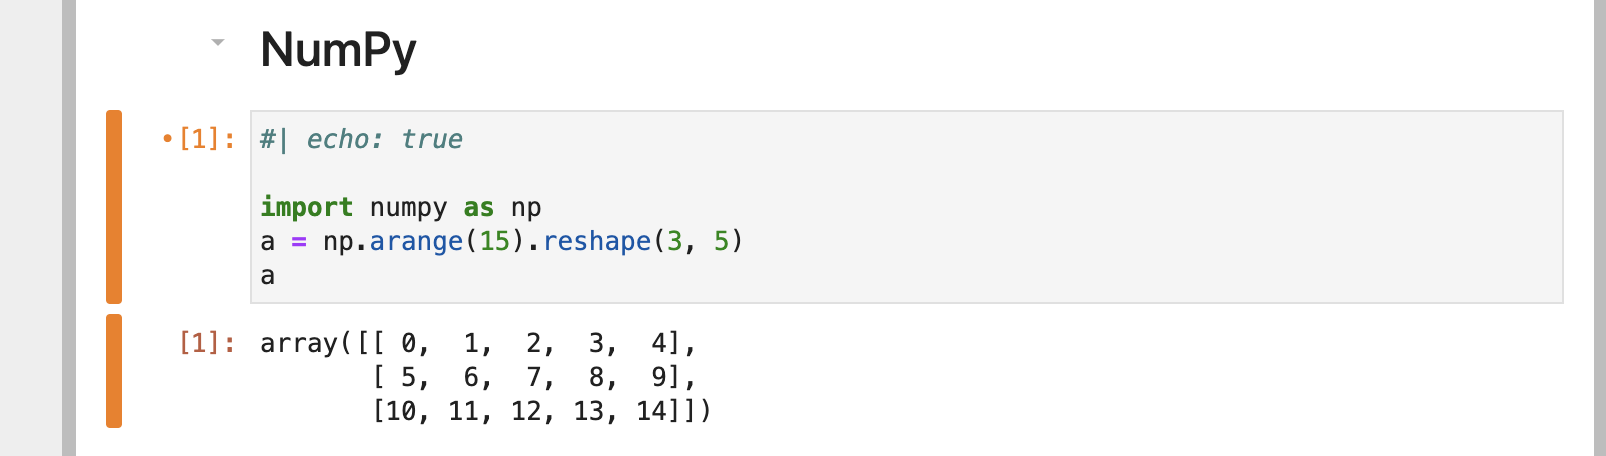 Screen shot of NumPy section of Jupyter notebook with 'echo: true' set as a cell option for the code cell.